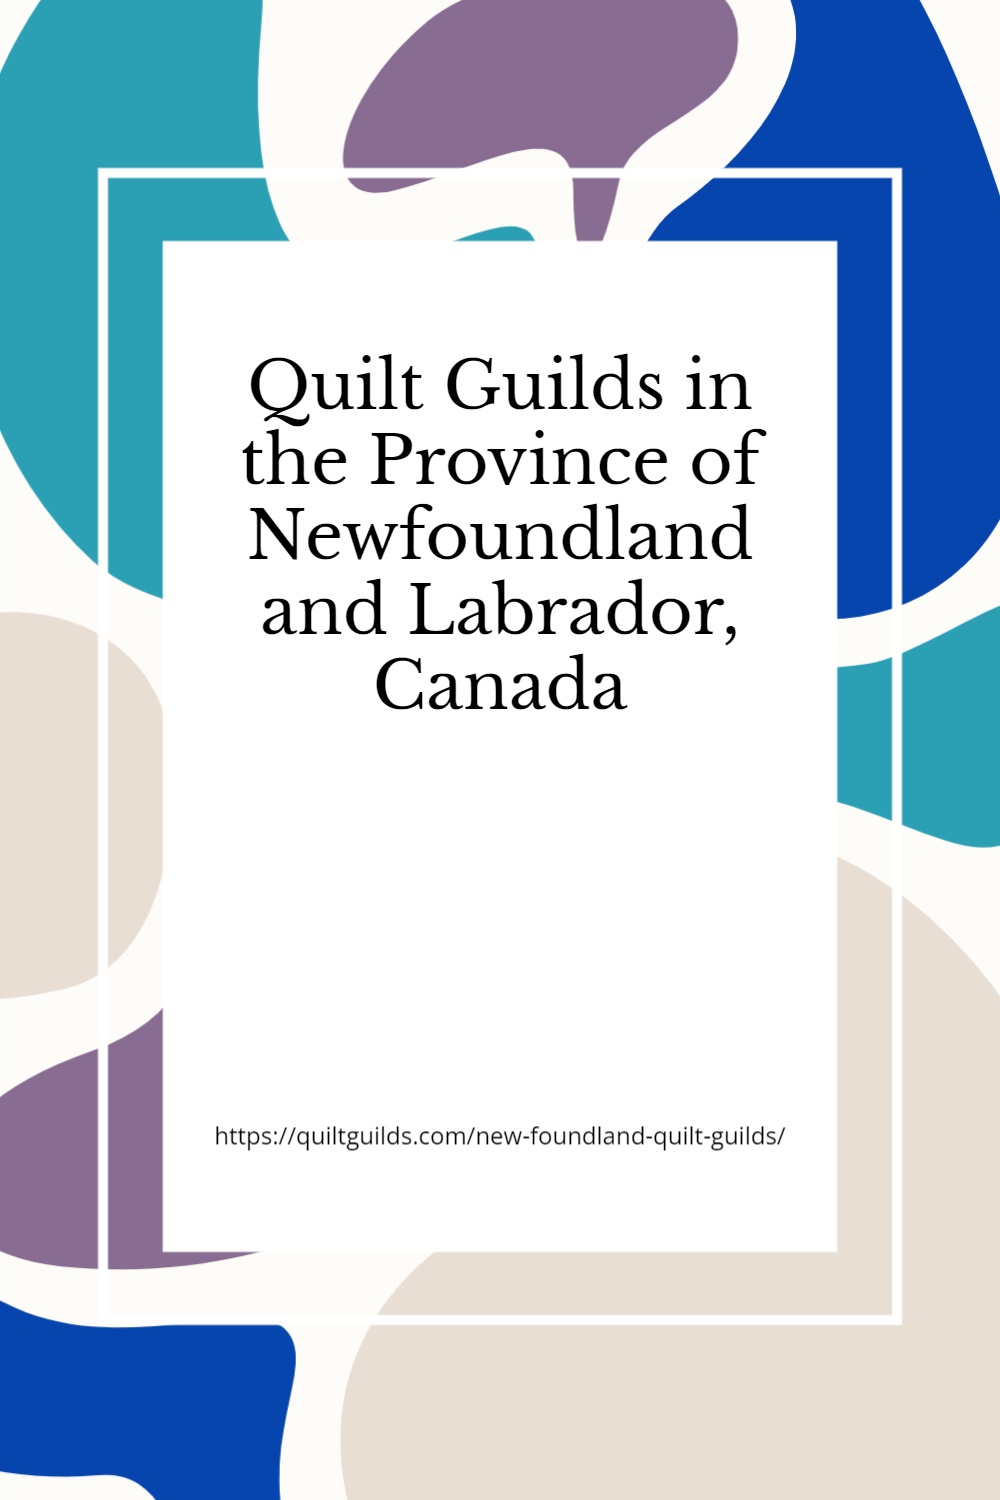 Quilting Guilds in Newfoundland and Labrador for Canadian quilters